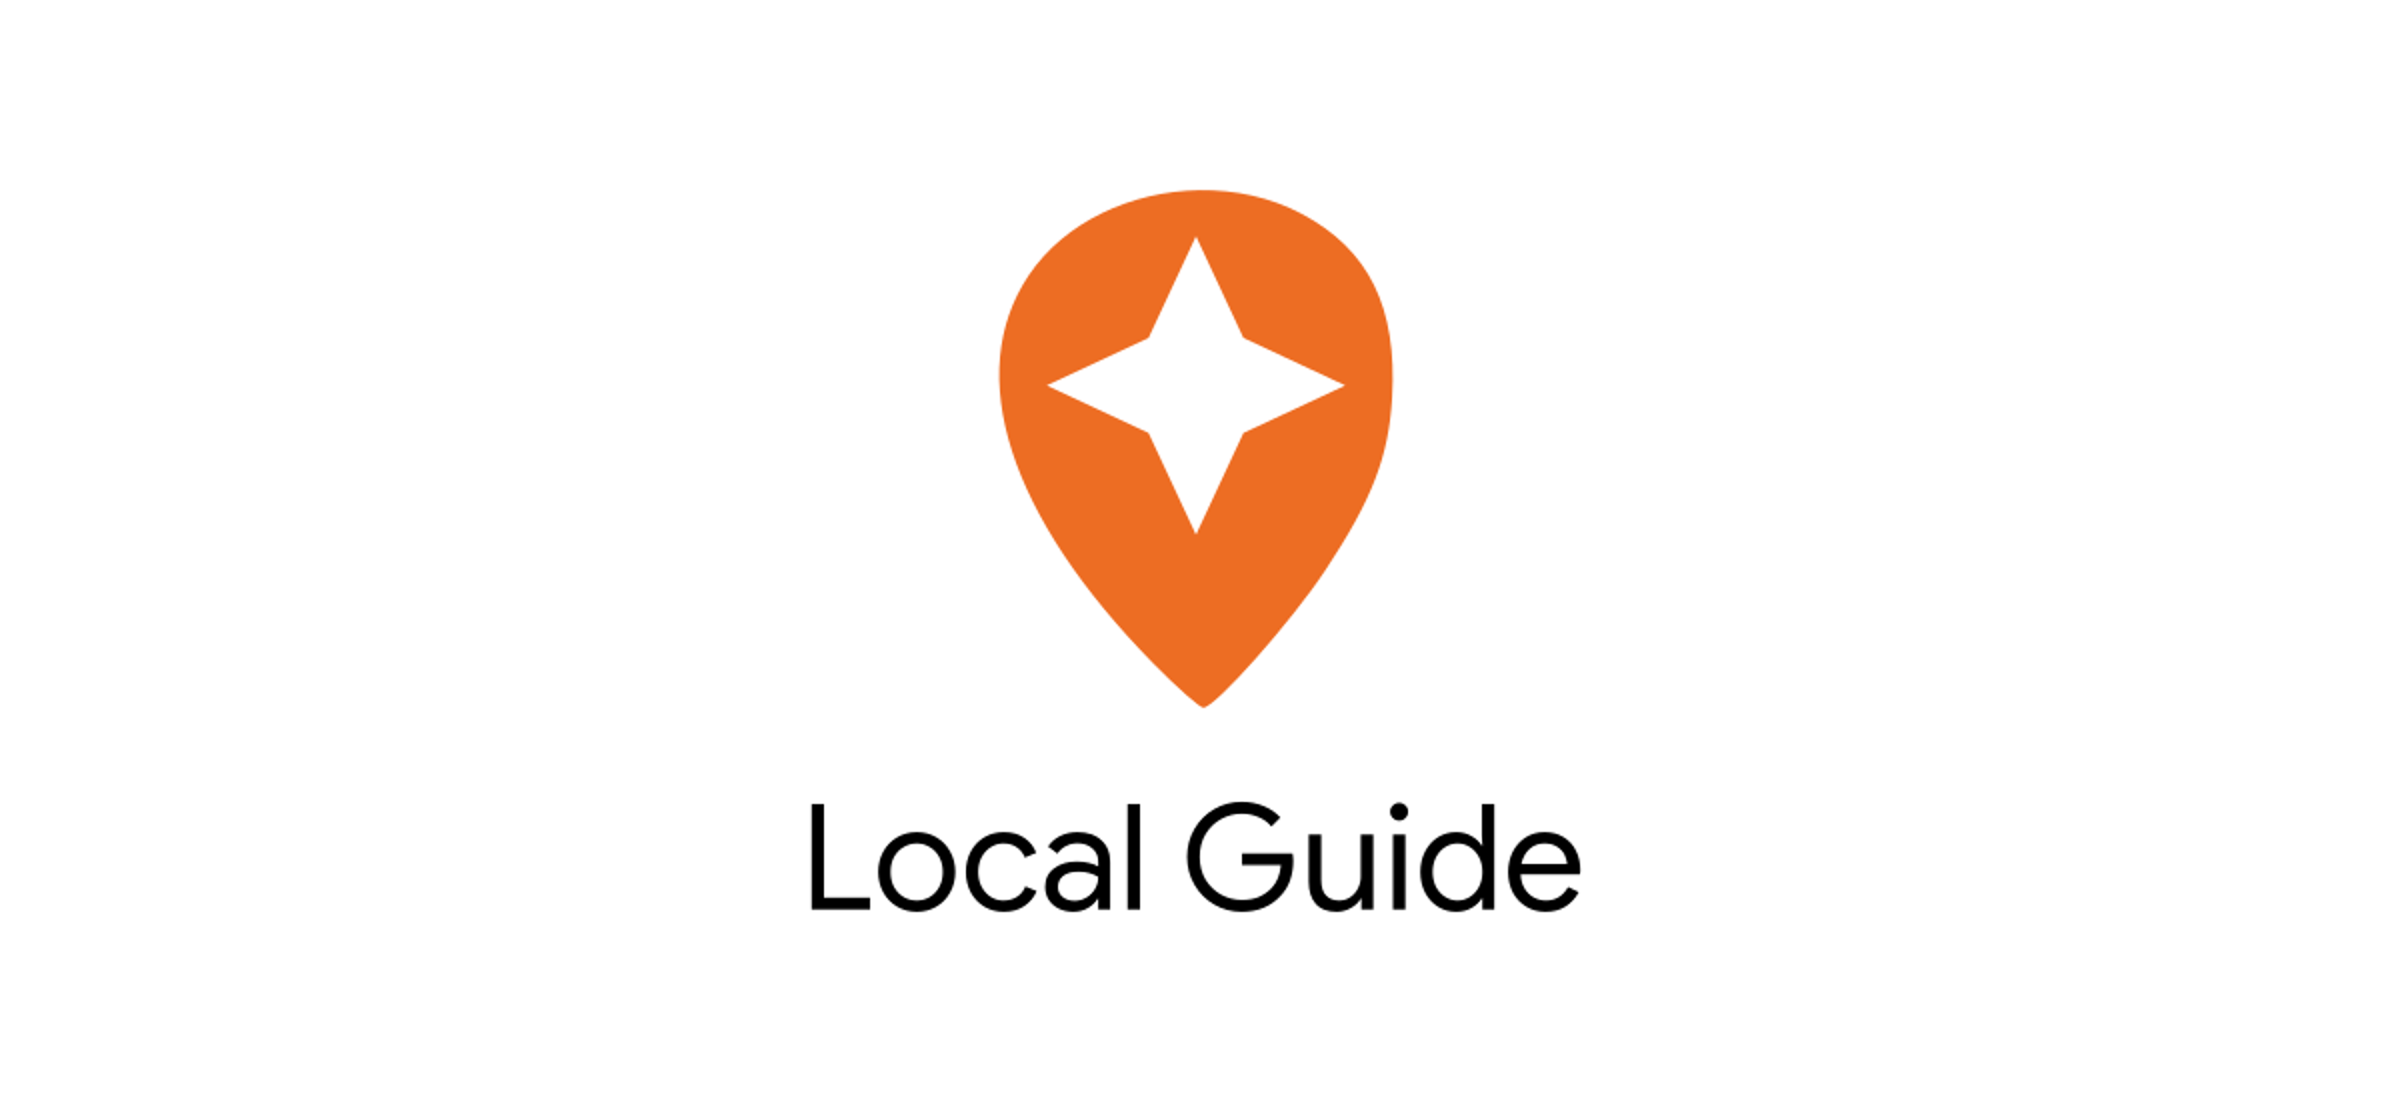 What Is The Google Local Guide Program?